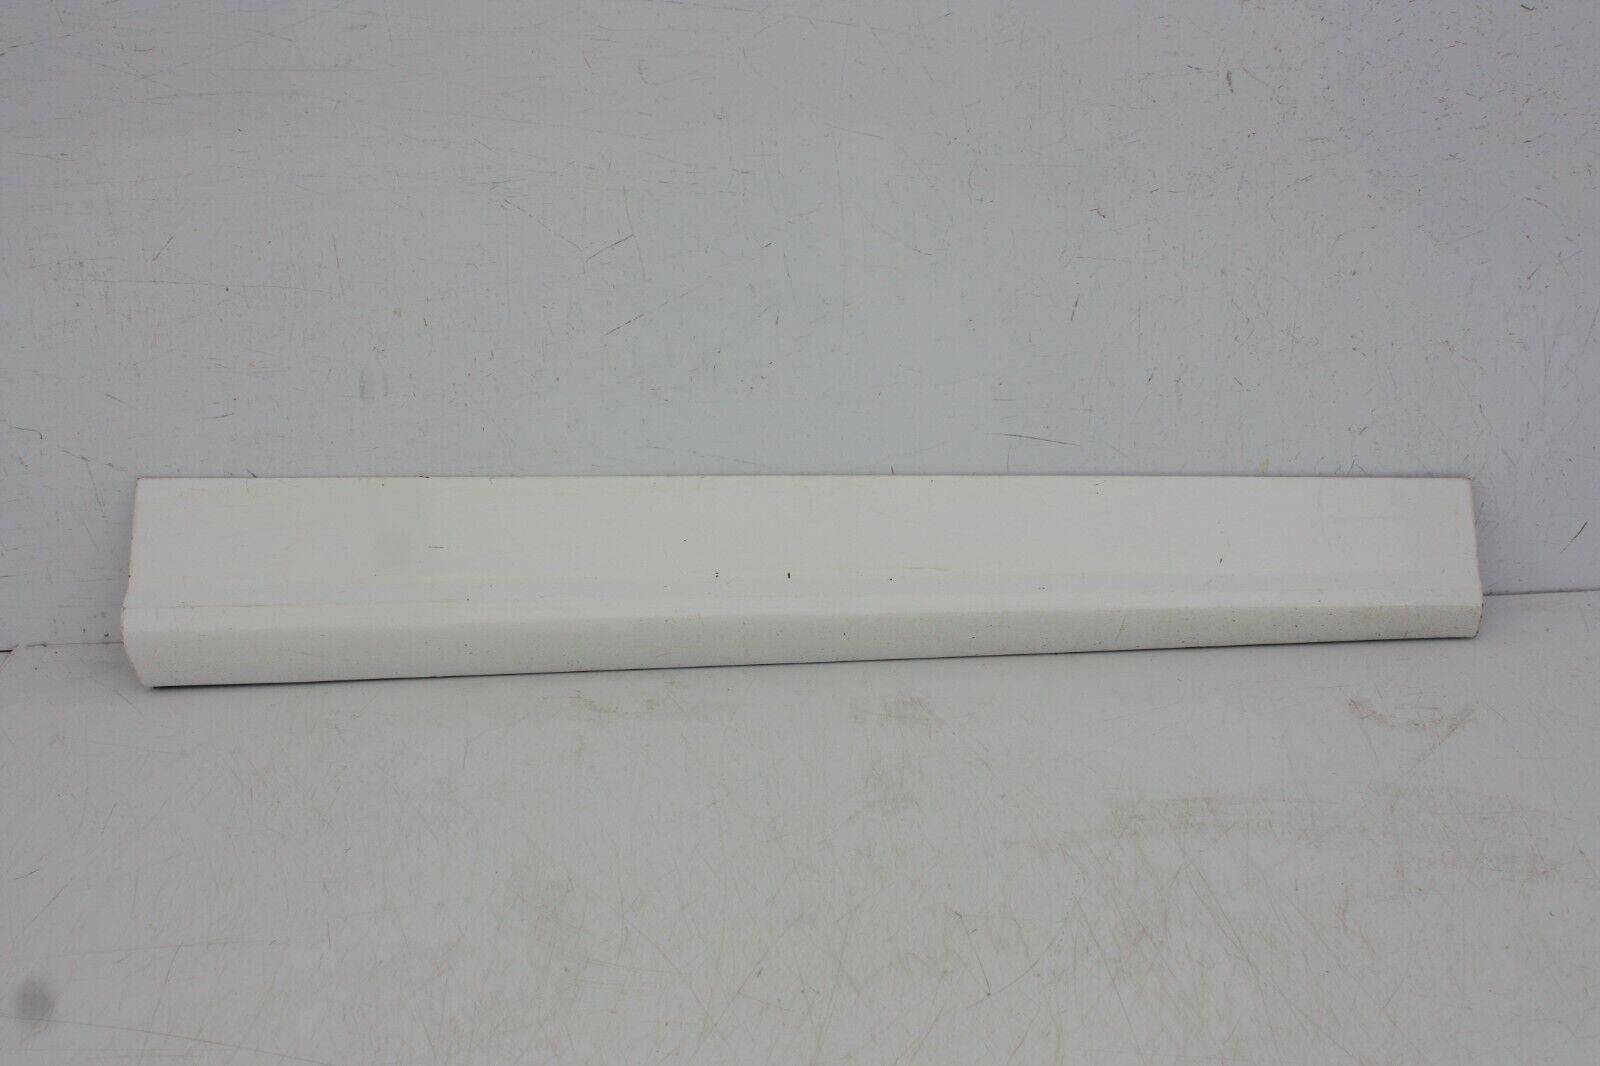 Audi Q5 S Line Front Right Side Door Moulding 2017 TO 2020 Genuine 175367544167